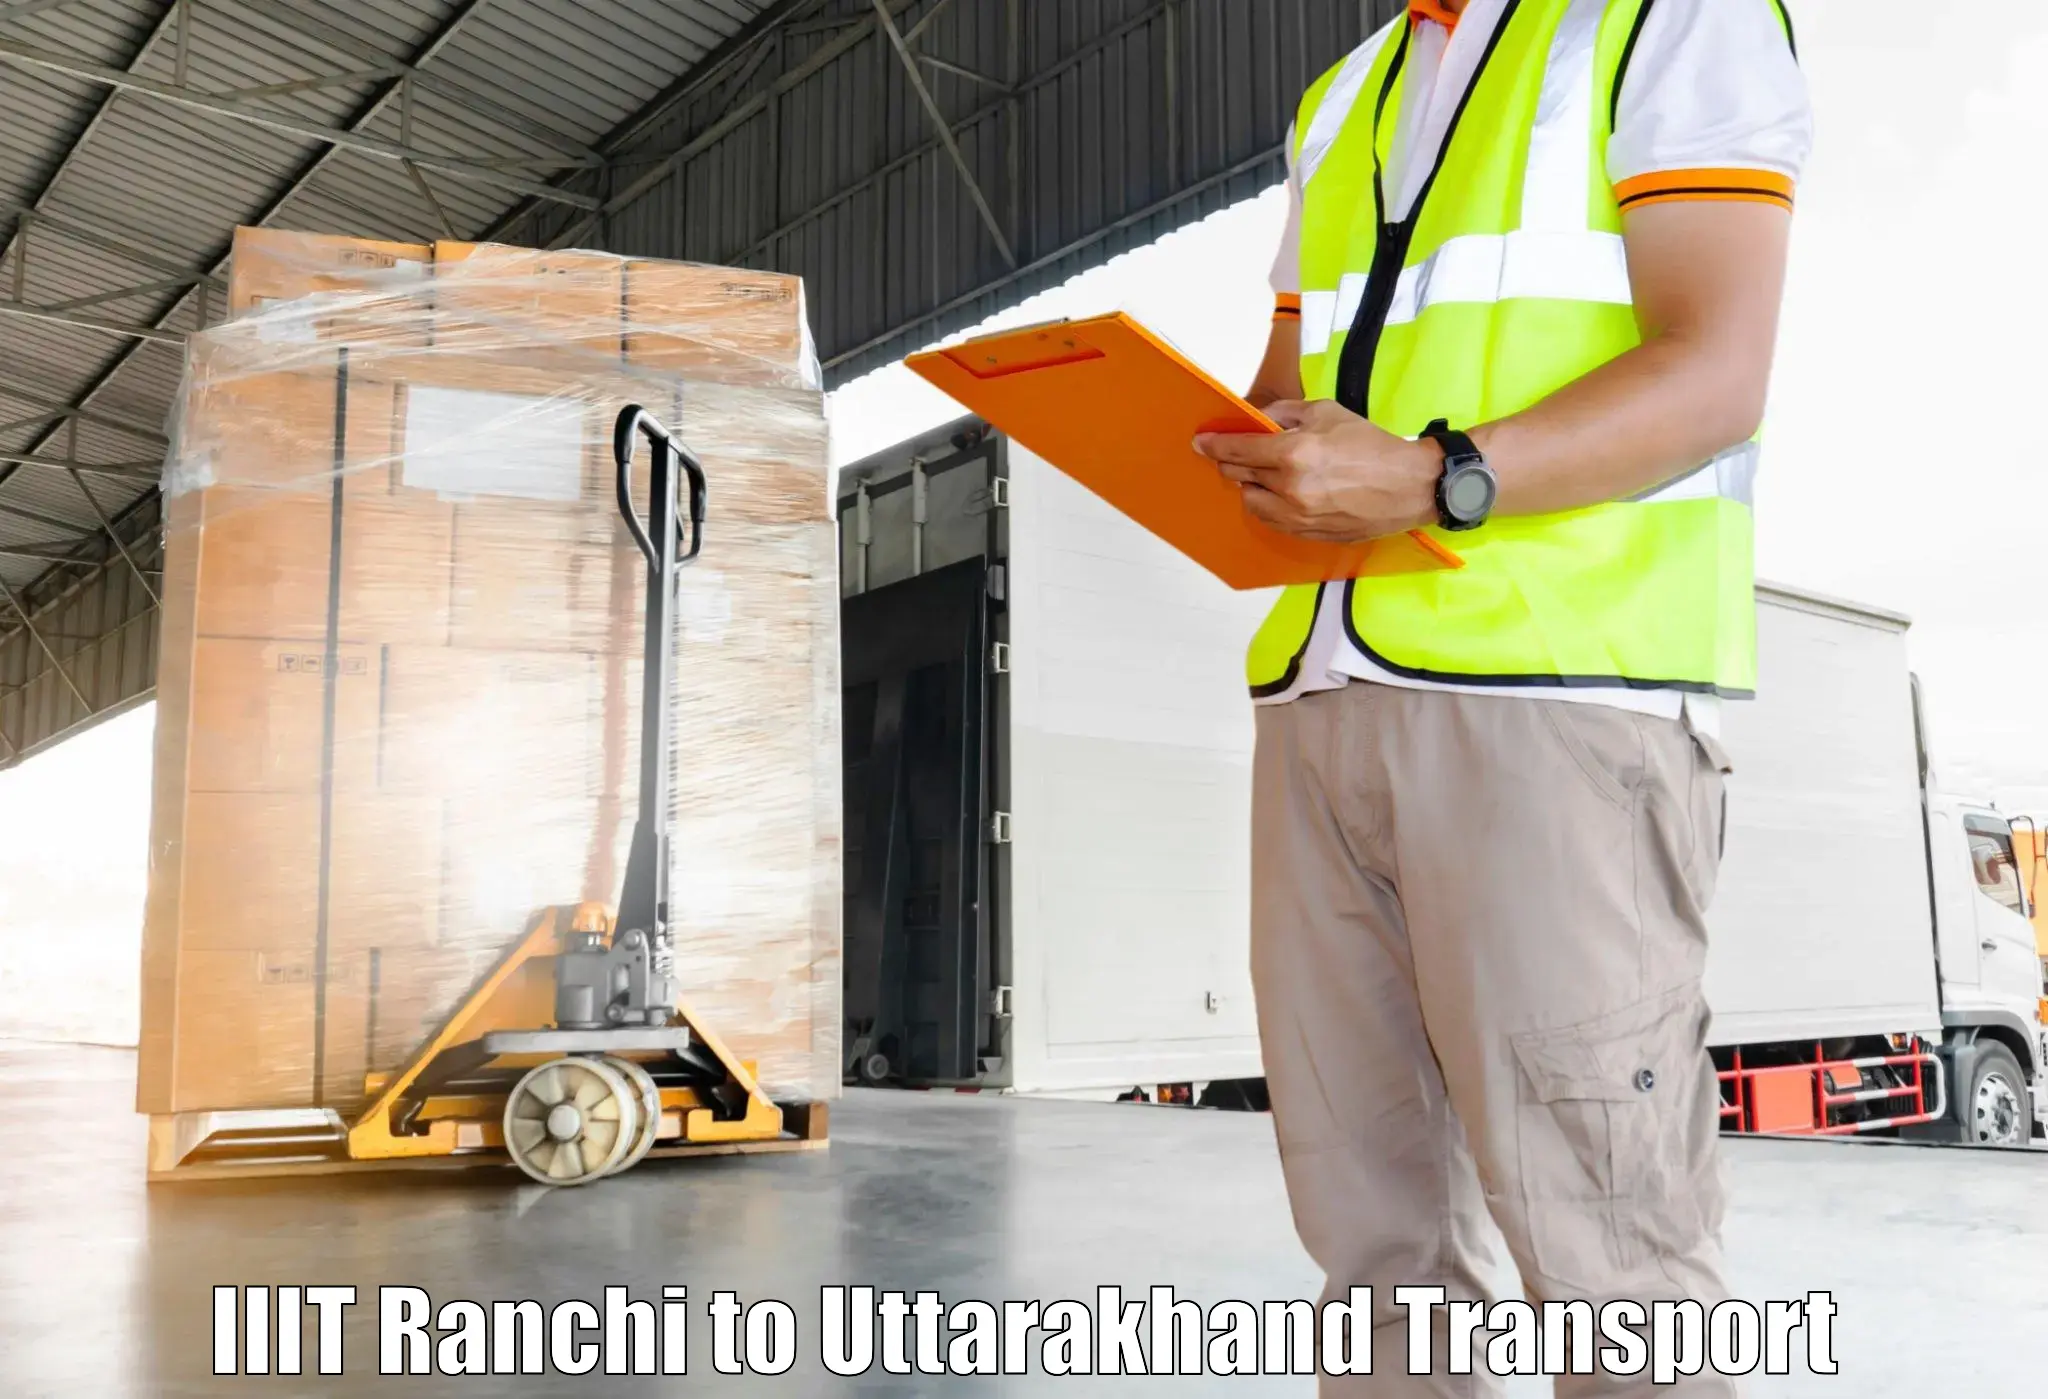 Cargo transportation services in IIIT Ranchi to Bageshwar